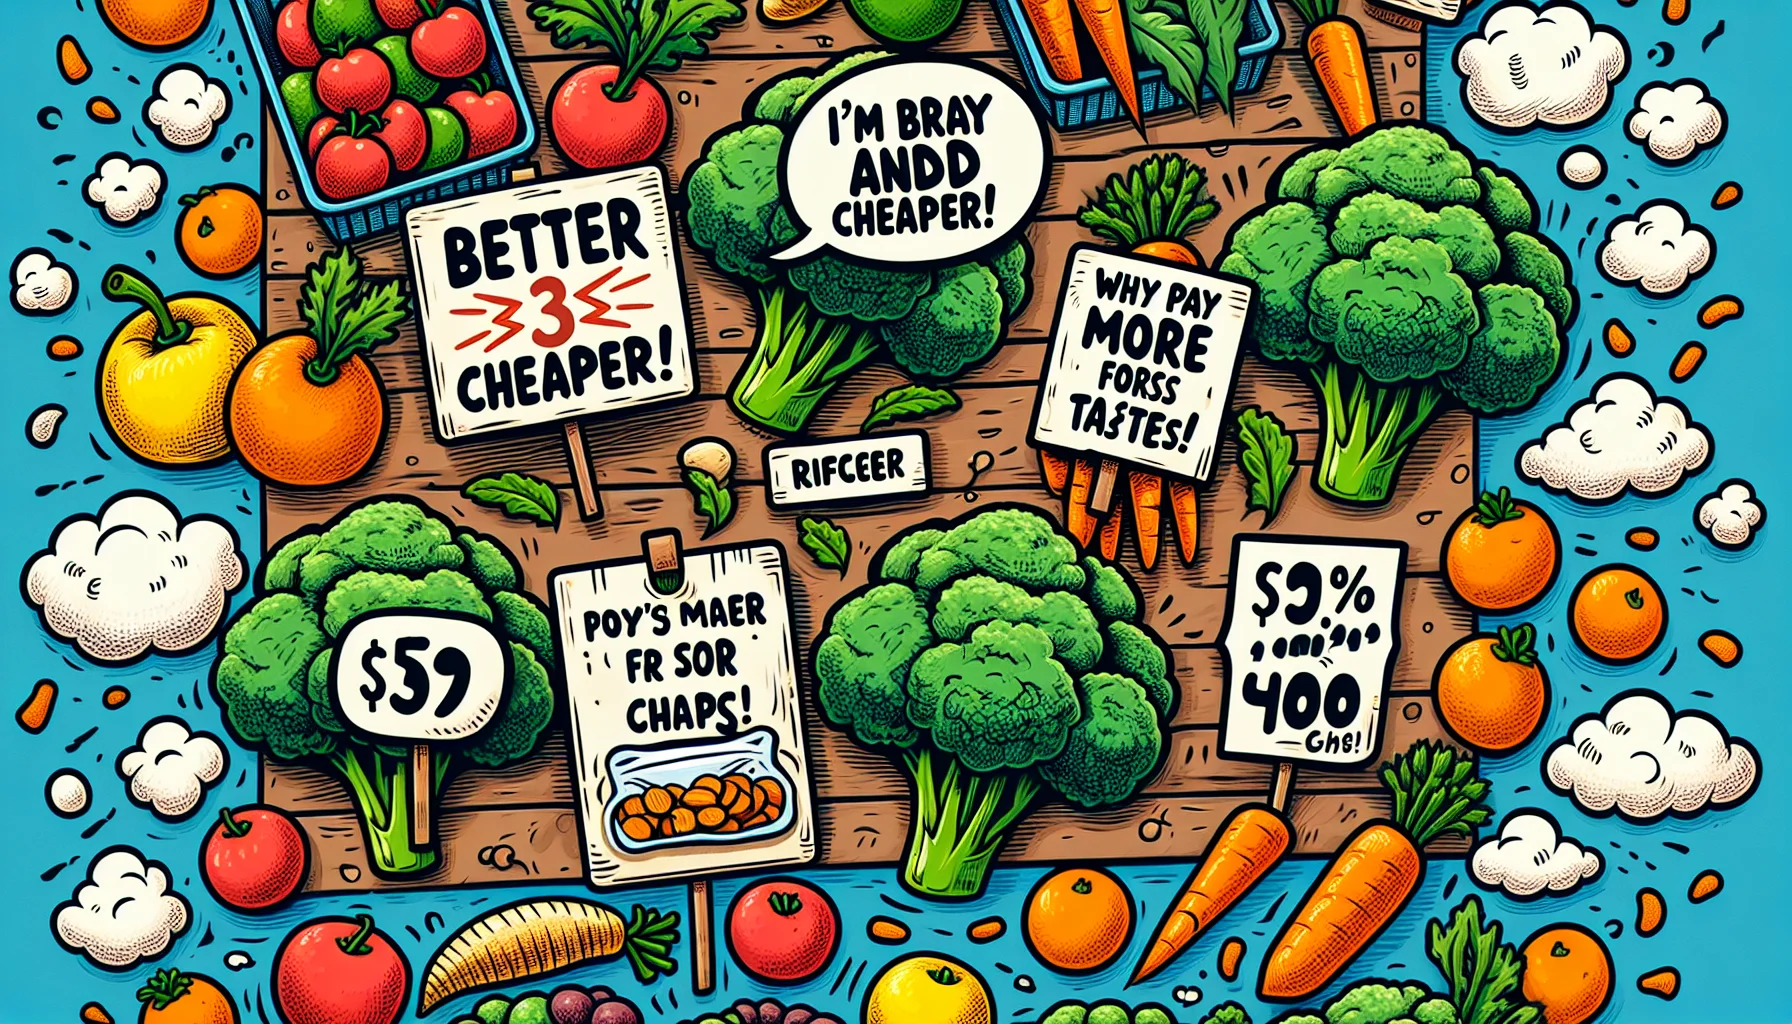 Create an image of a bustling farmer's market with vibrant fruits and vegetables being sold at discounted prices. Humorous price tags are scattered throughout the market. One tag shows a broccoli bunch priced cheaper than a bag of chips with a small comic bubble saying, 'I'm better and cheaper!' Similarly, a bunch of carrots have the tag saying, 'Why pay more for less taste?' and so on, illustrating the concept of eating healthy for less.